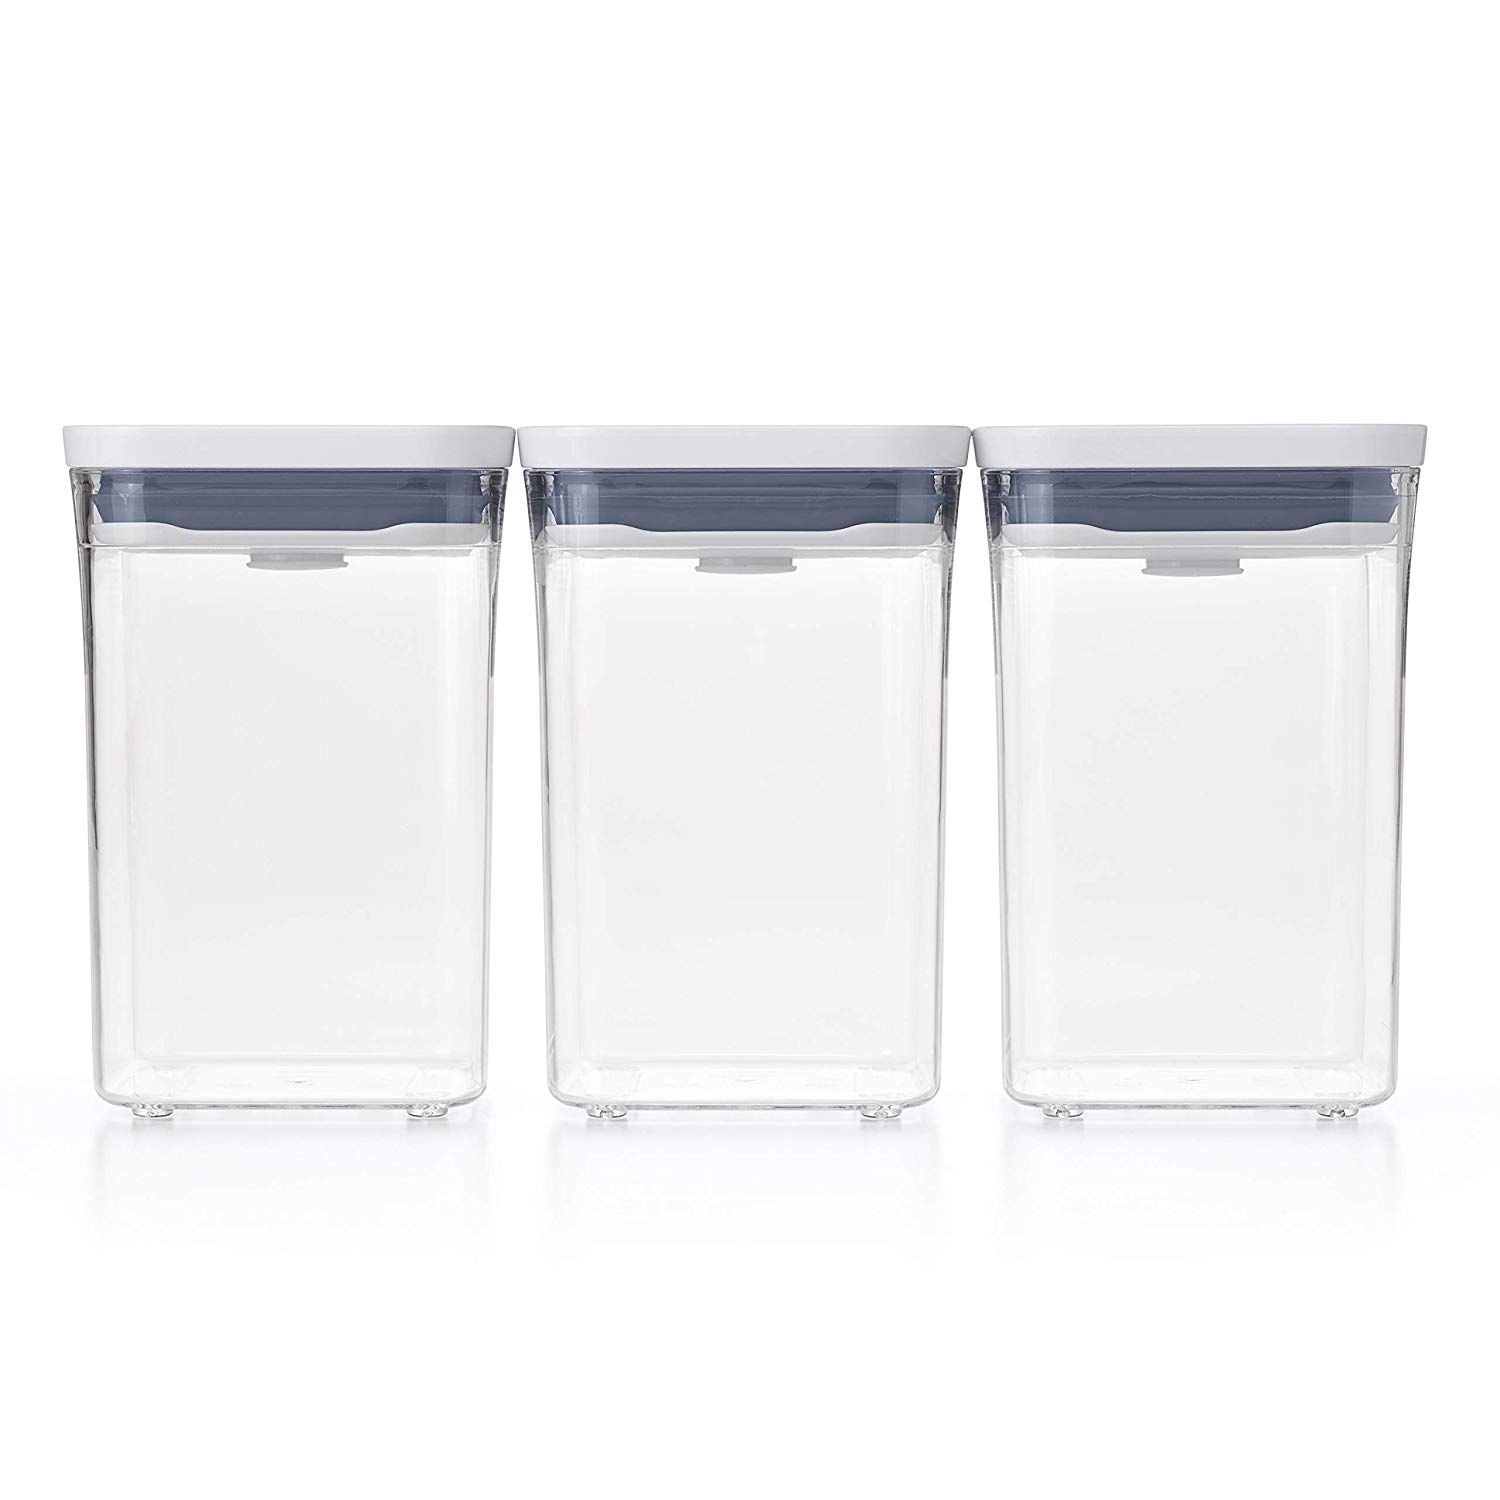 OXO Good Grips POP Container (Three-Piece Rectangle Set with Scoop